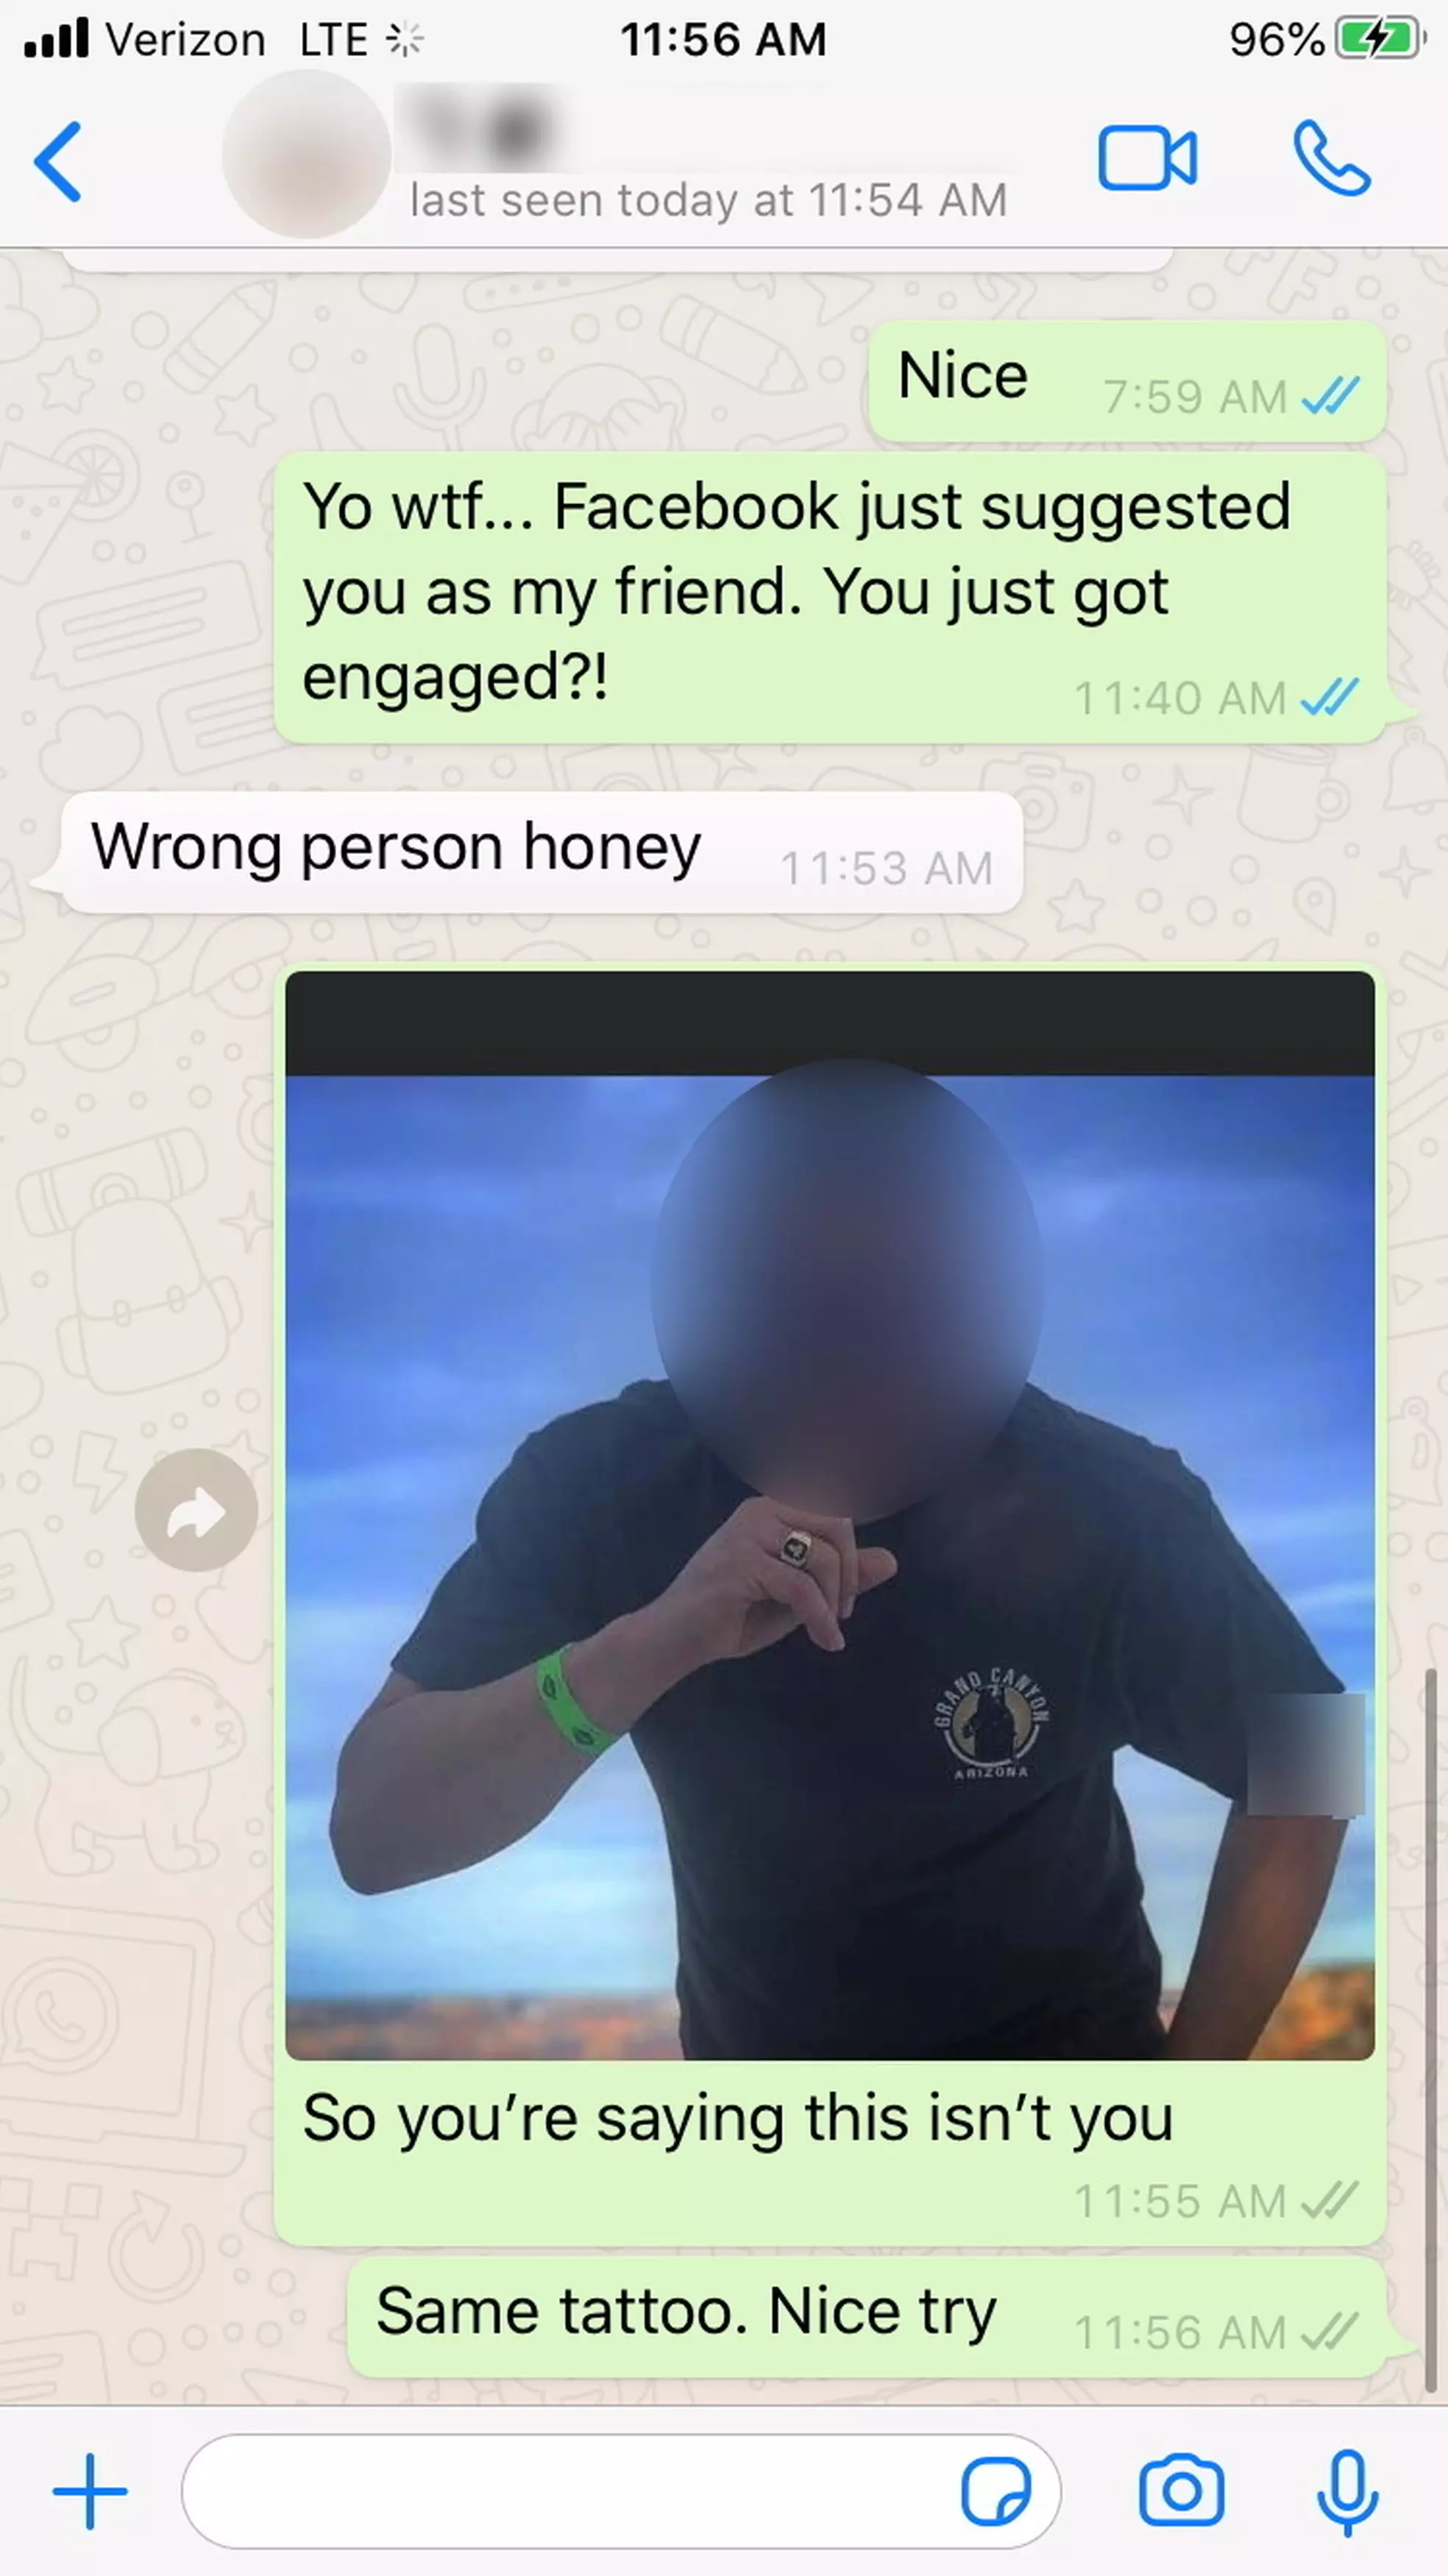 She confronted her Tinder match, who said 'wrong person, honey' (